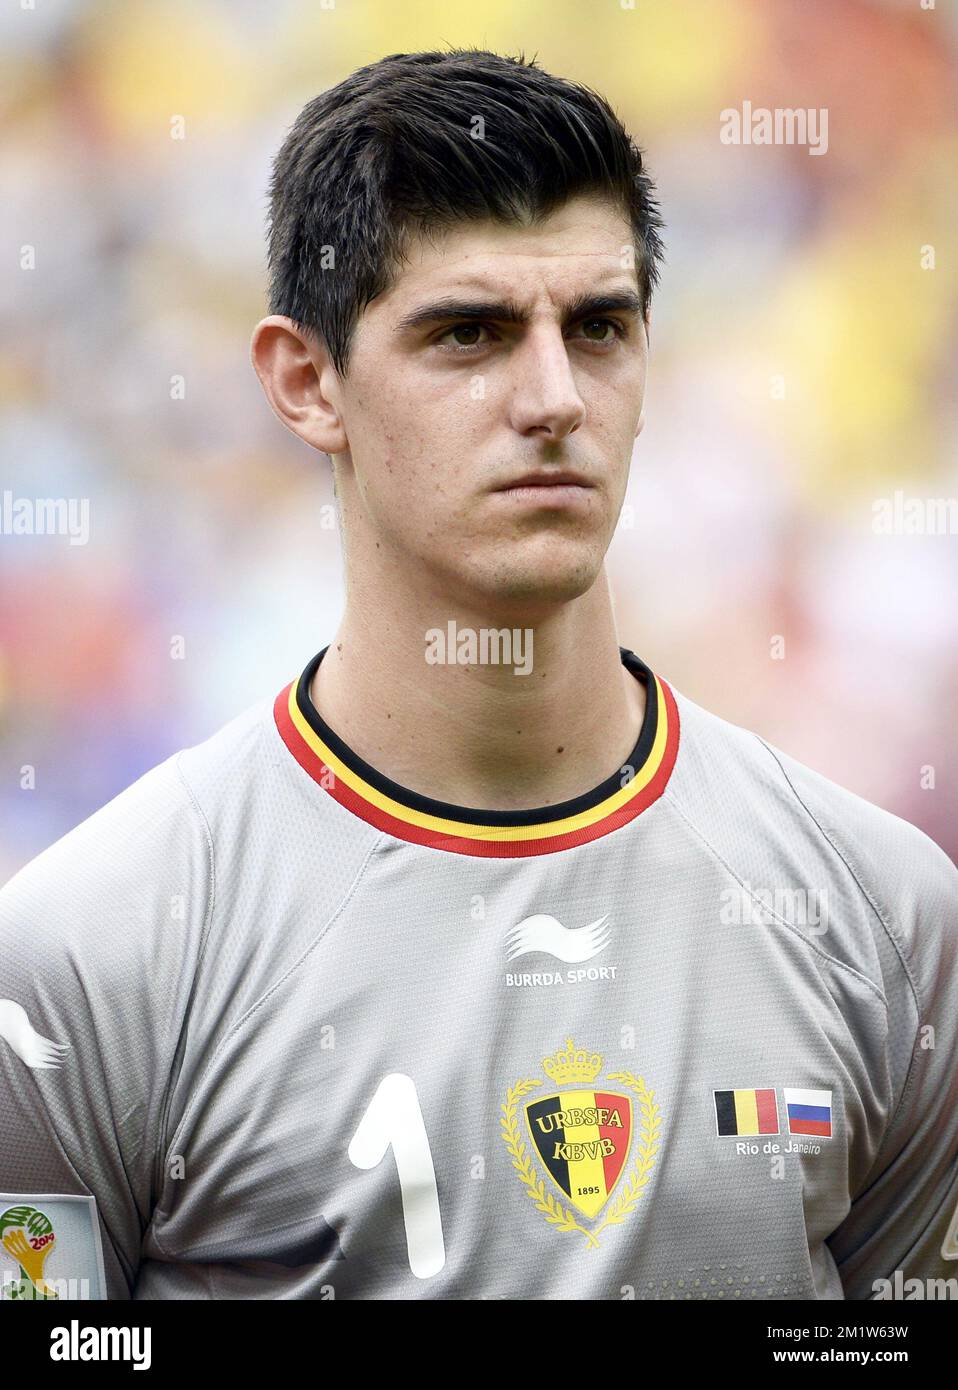 20140622 - RIO DE JANEIRO, BRAZIL: Belgium's goalkeeper Thibaut Courtois pictured at the start of a soccer game between Belgian national team The Red Devils and Russia in Rio de Janeiro, Brazil, the second game in Group H of the first round of the 2014 FIFA World Cup, Sunday 22 June 2014.   BELGA PHOTO DIRK WAEM Stock Photo